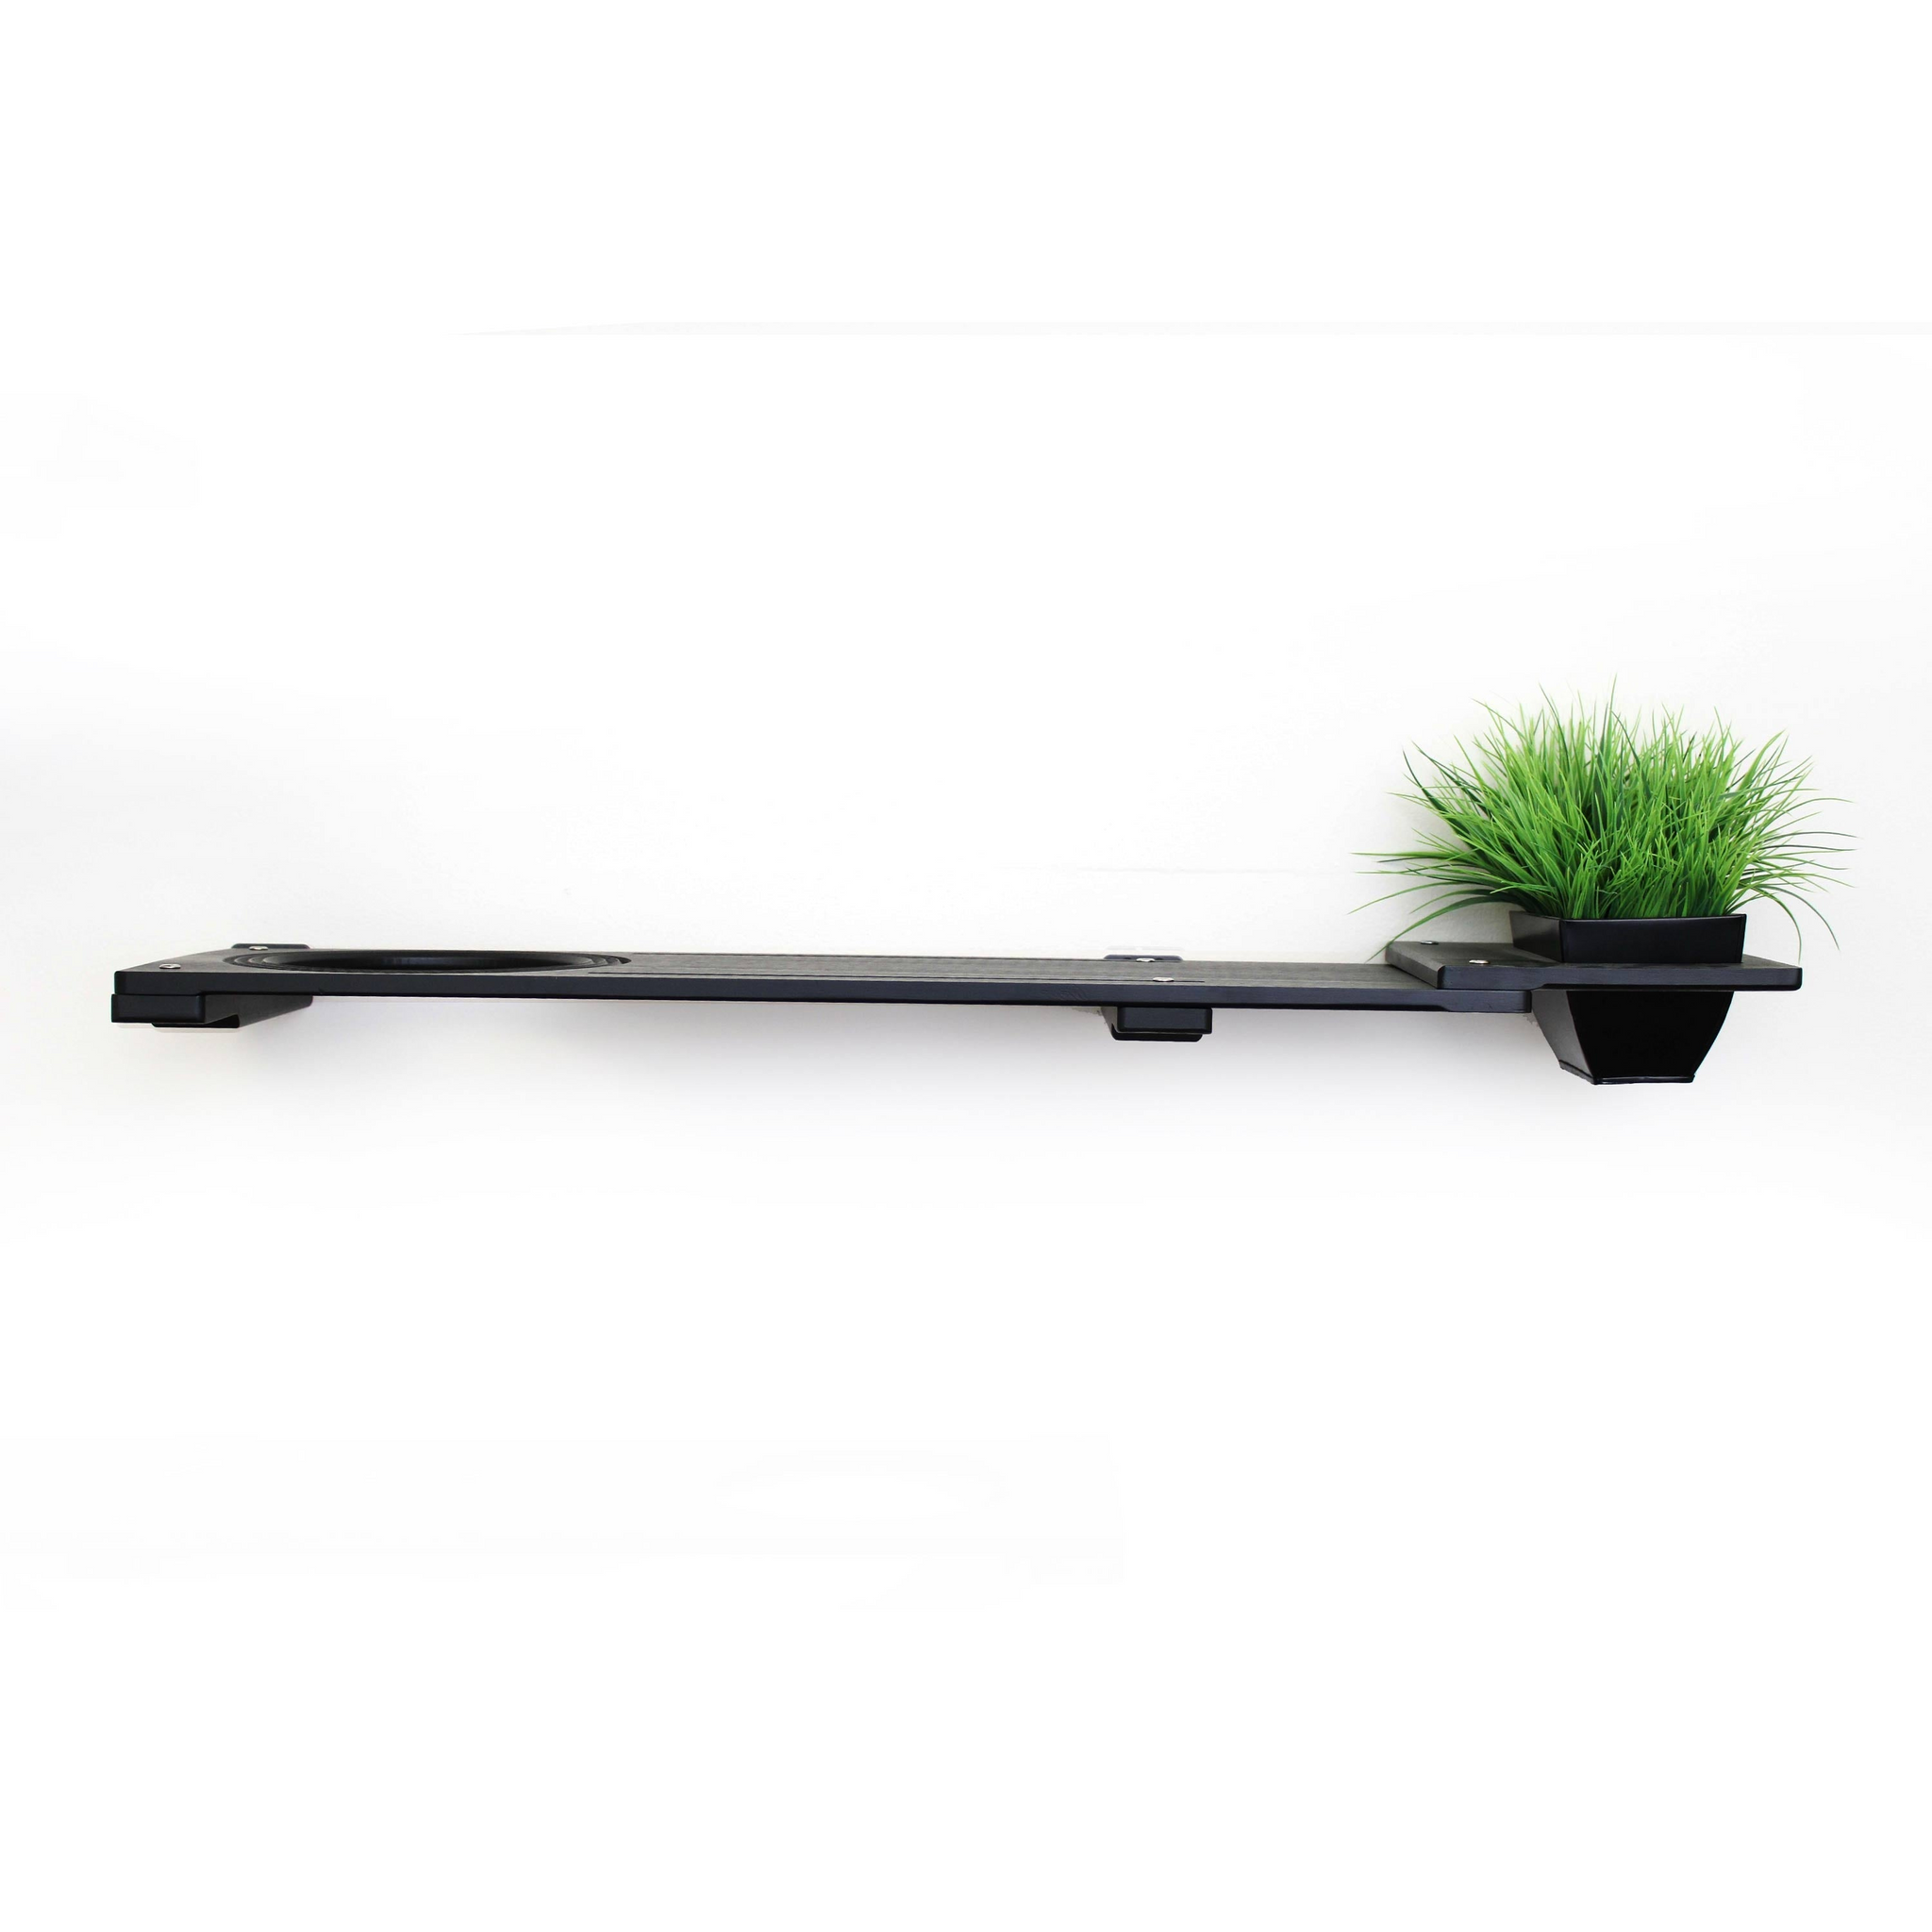 Planter Cat Shelf - for Cat Safe Plants by Catastrophic Creations